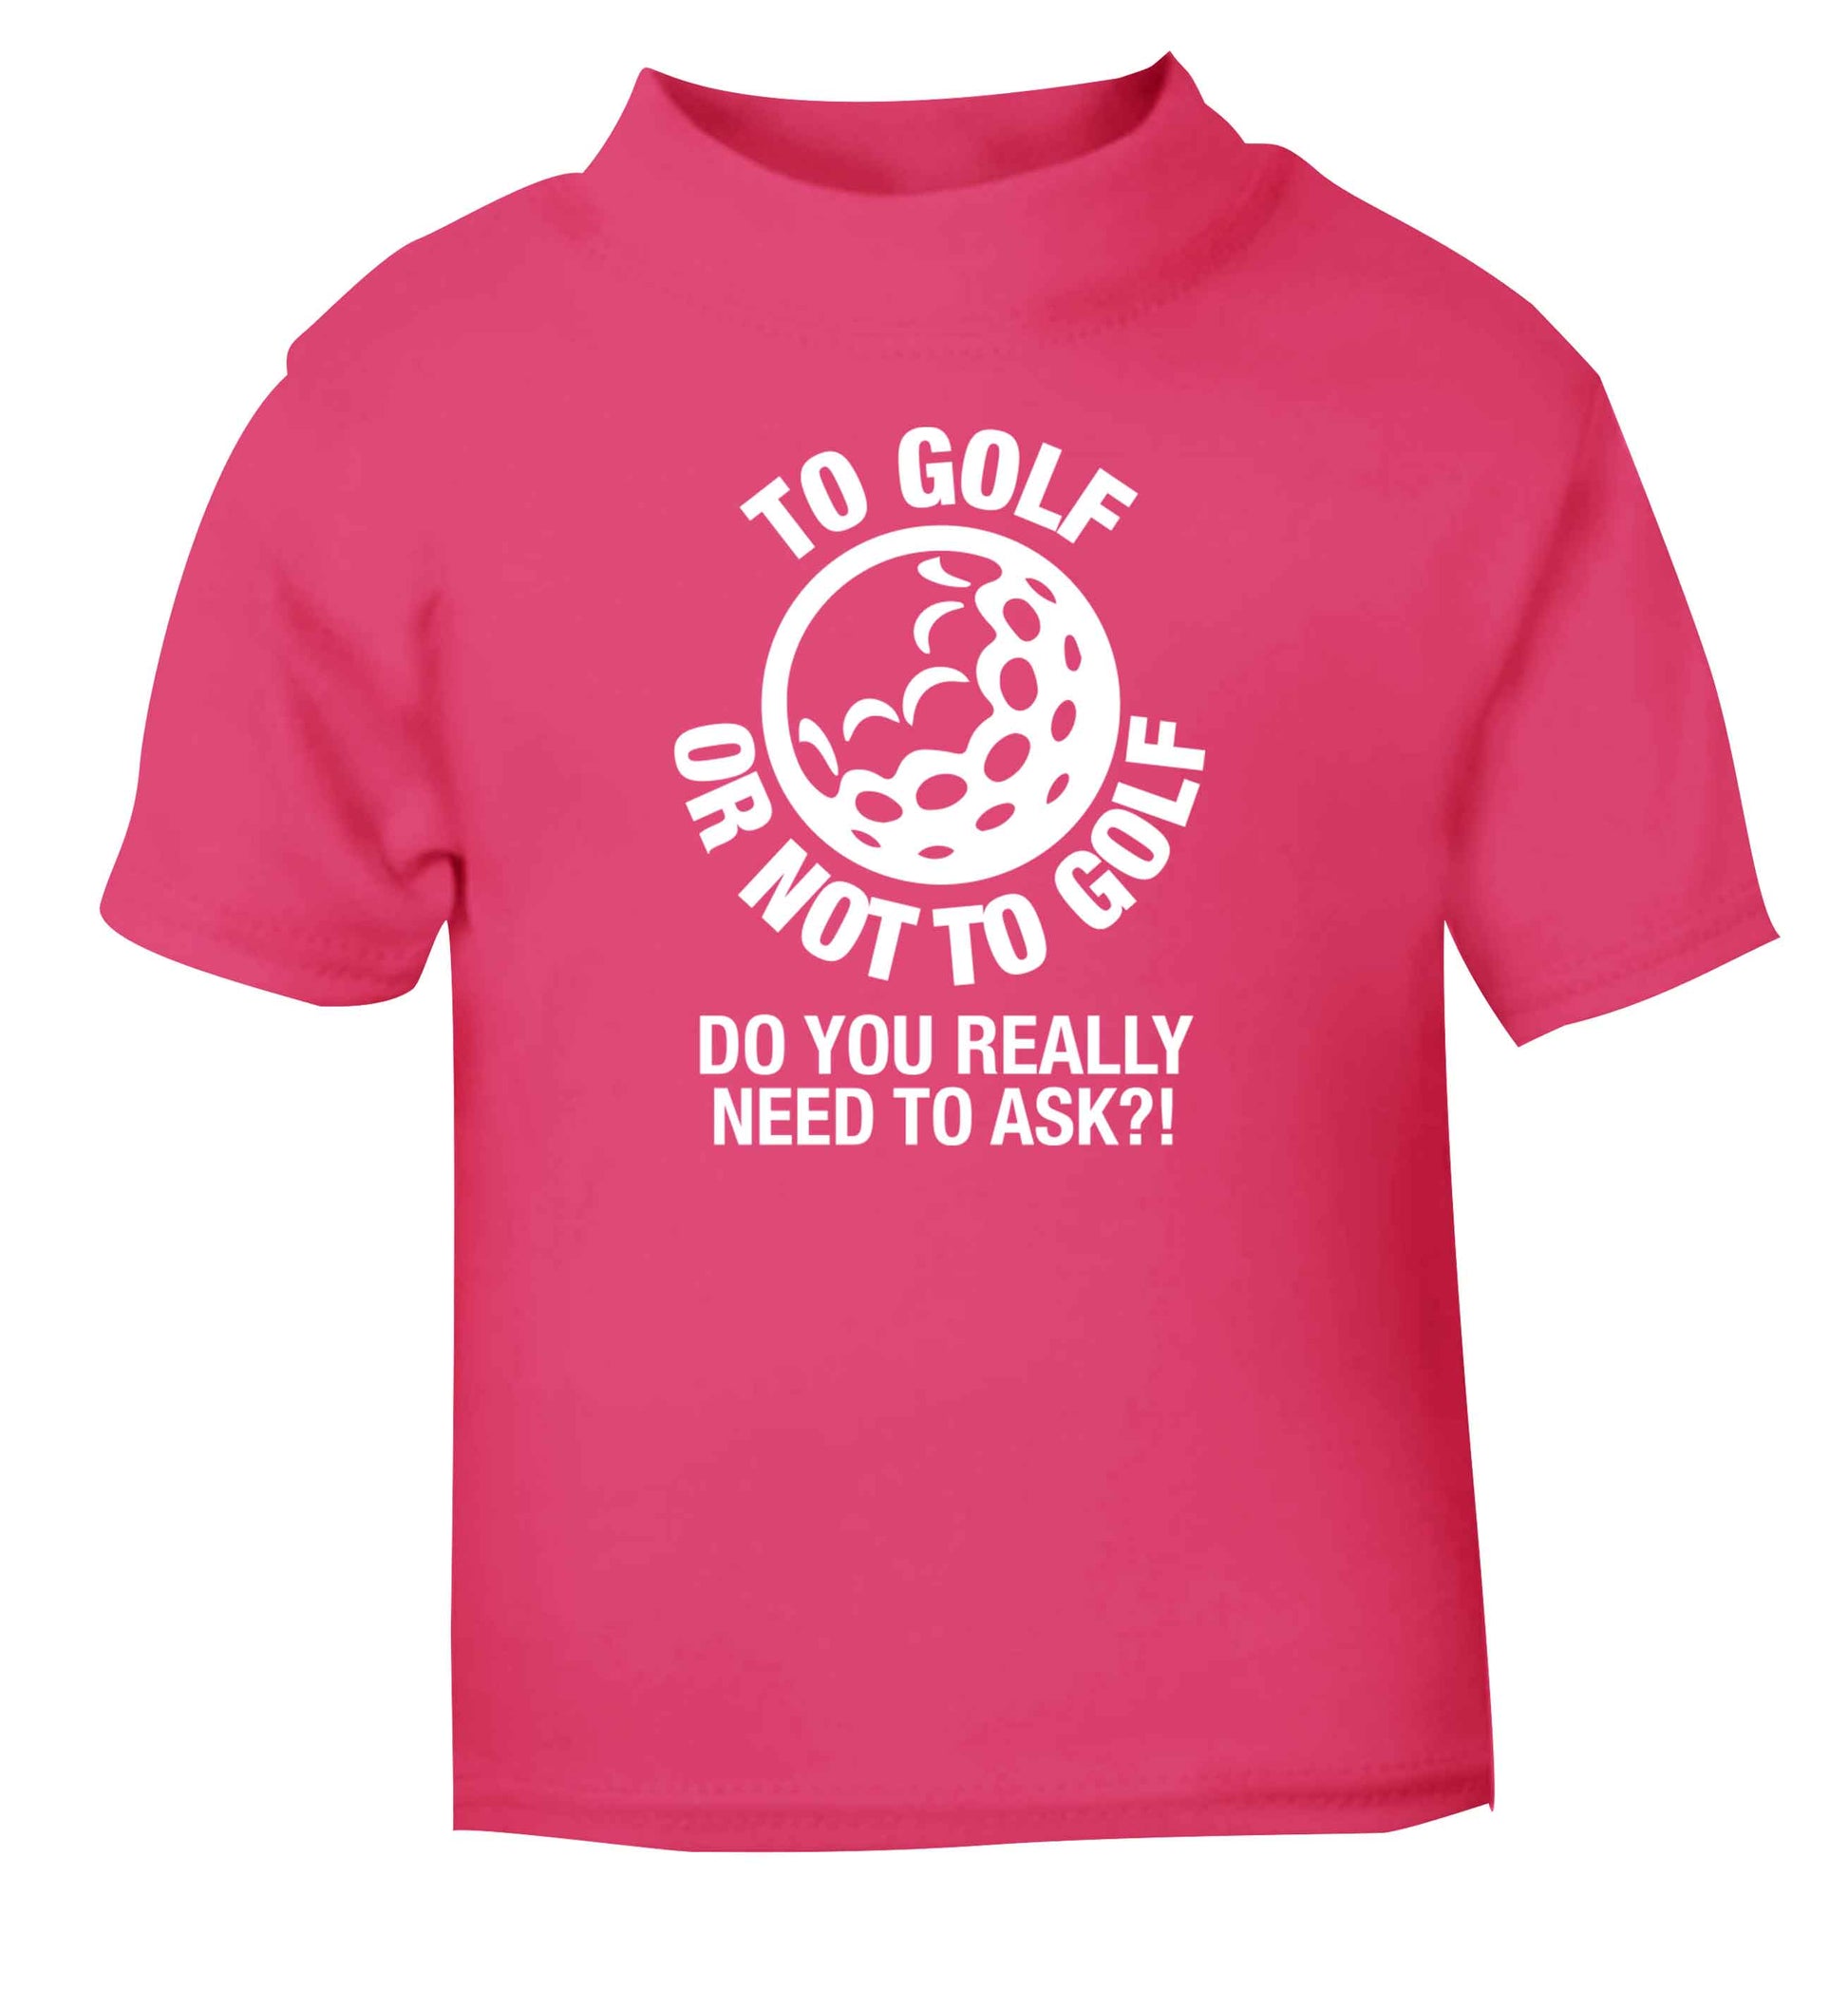 To golf or not to golf Do you really need to ask?! pink Baby Toddler Tshirt 2 Years